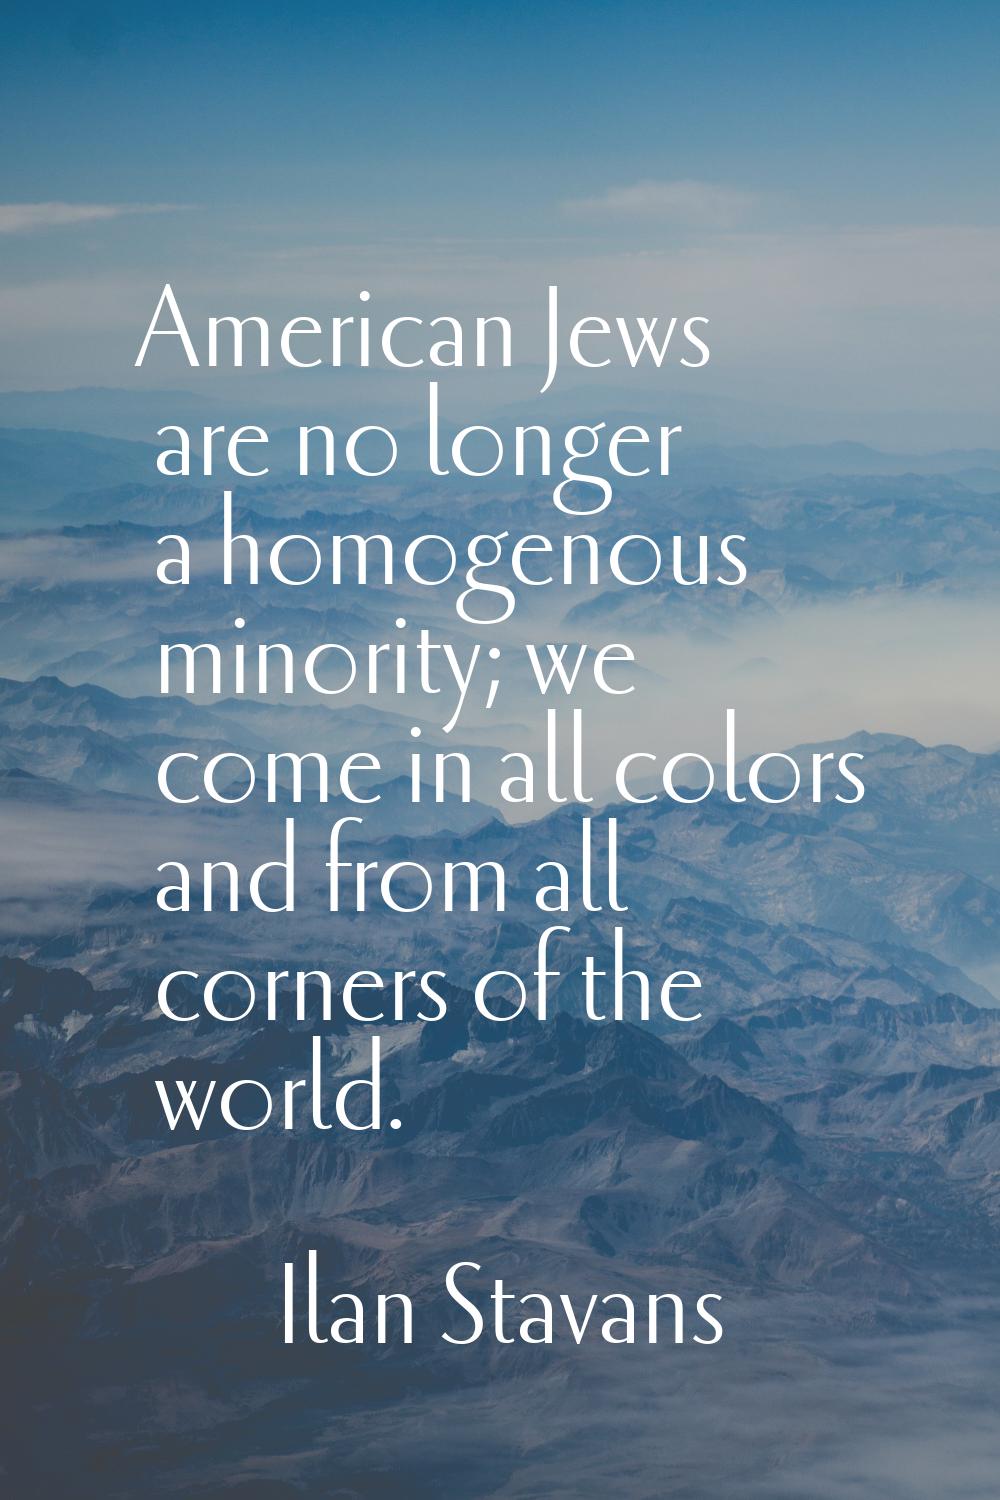 American Jews are no longer a homogenous minority; we come in all colors and from all corners of th